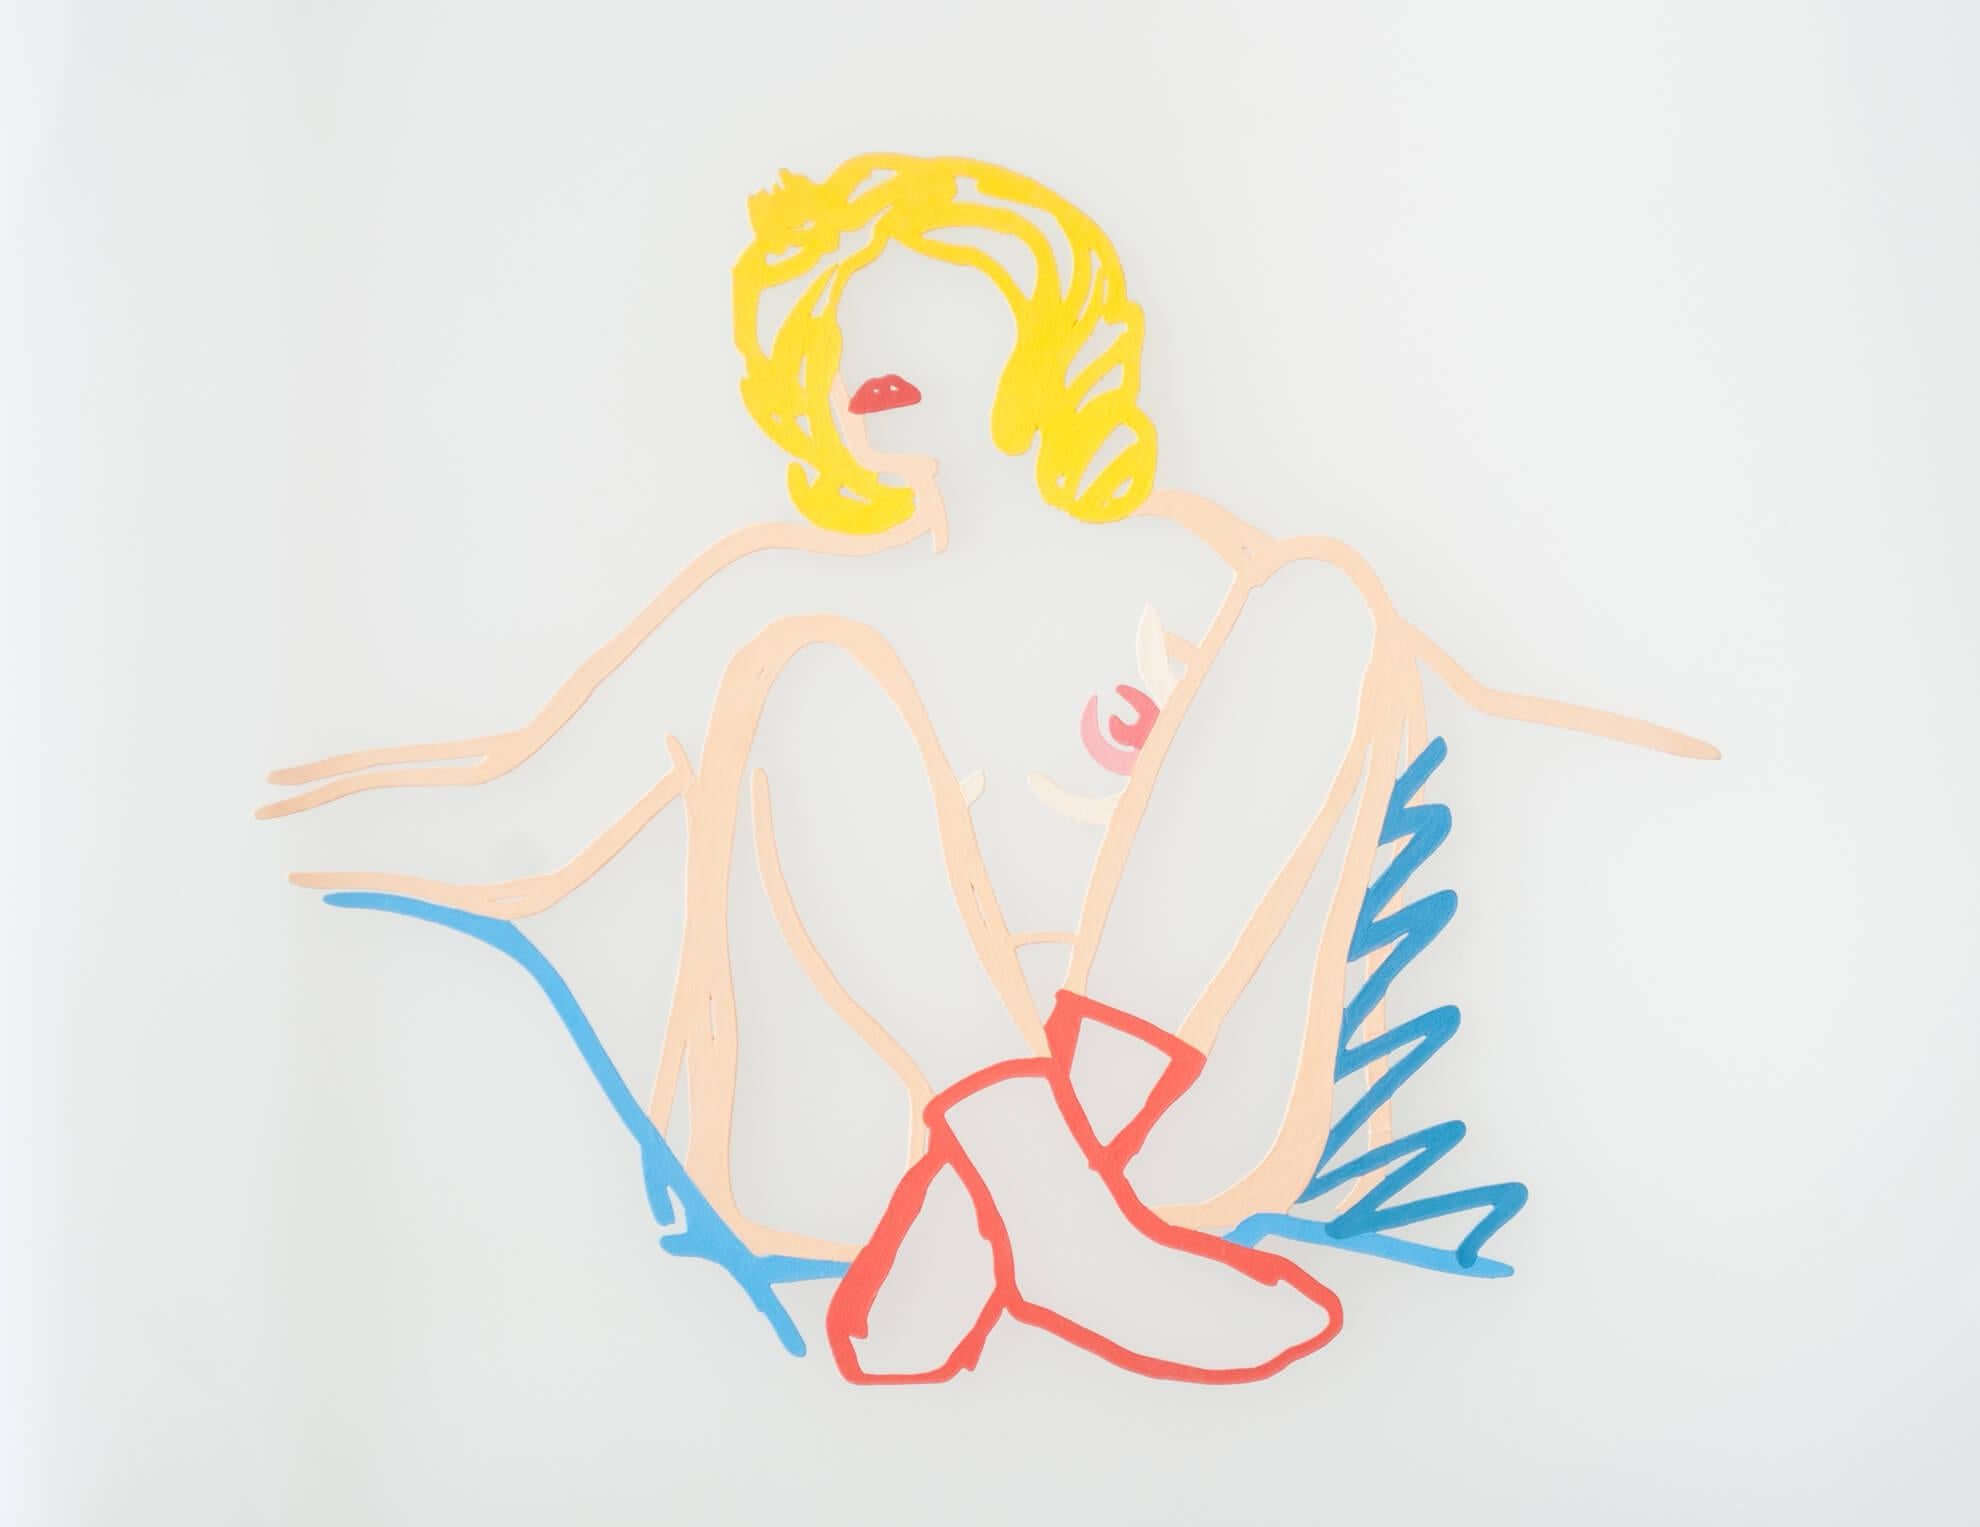 Rosemary with Socks, Arms outstretched - Mixed Media Art by Tom Wesselmann